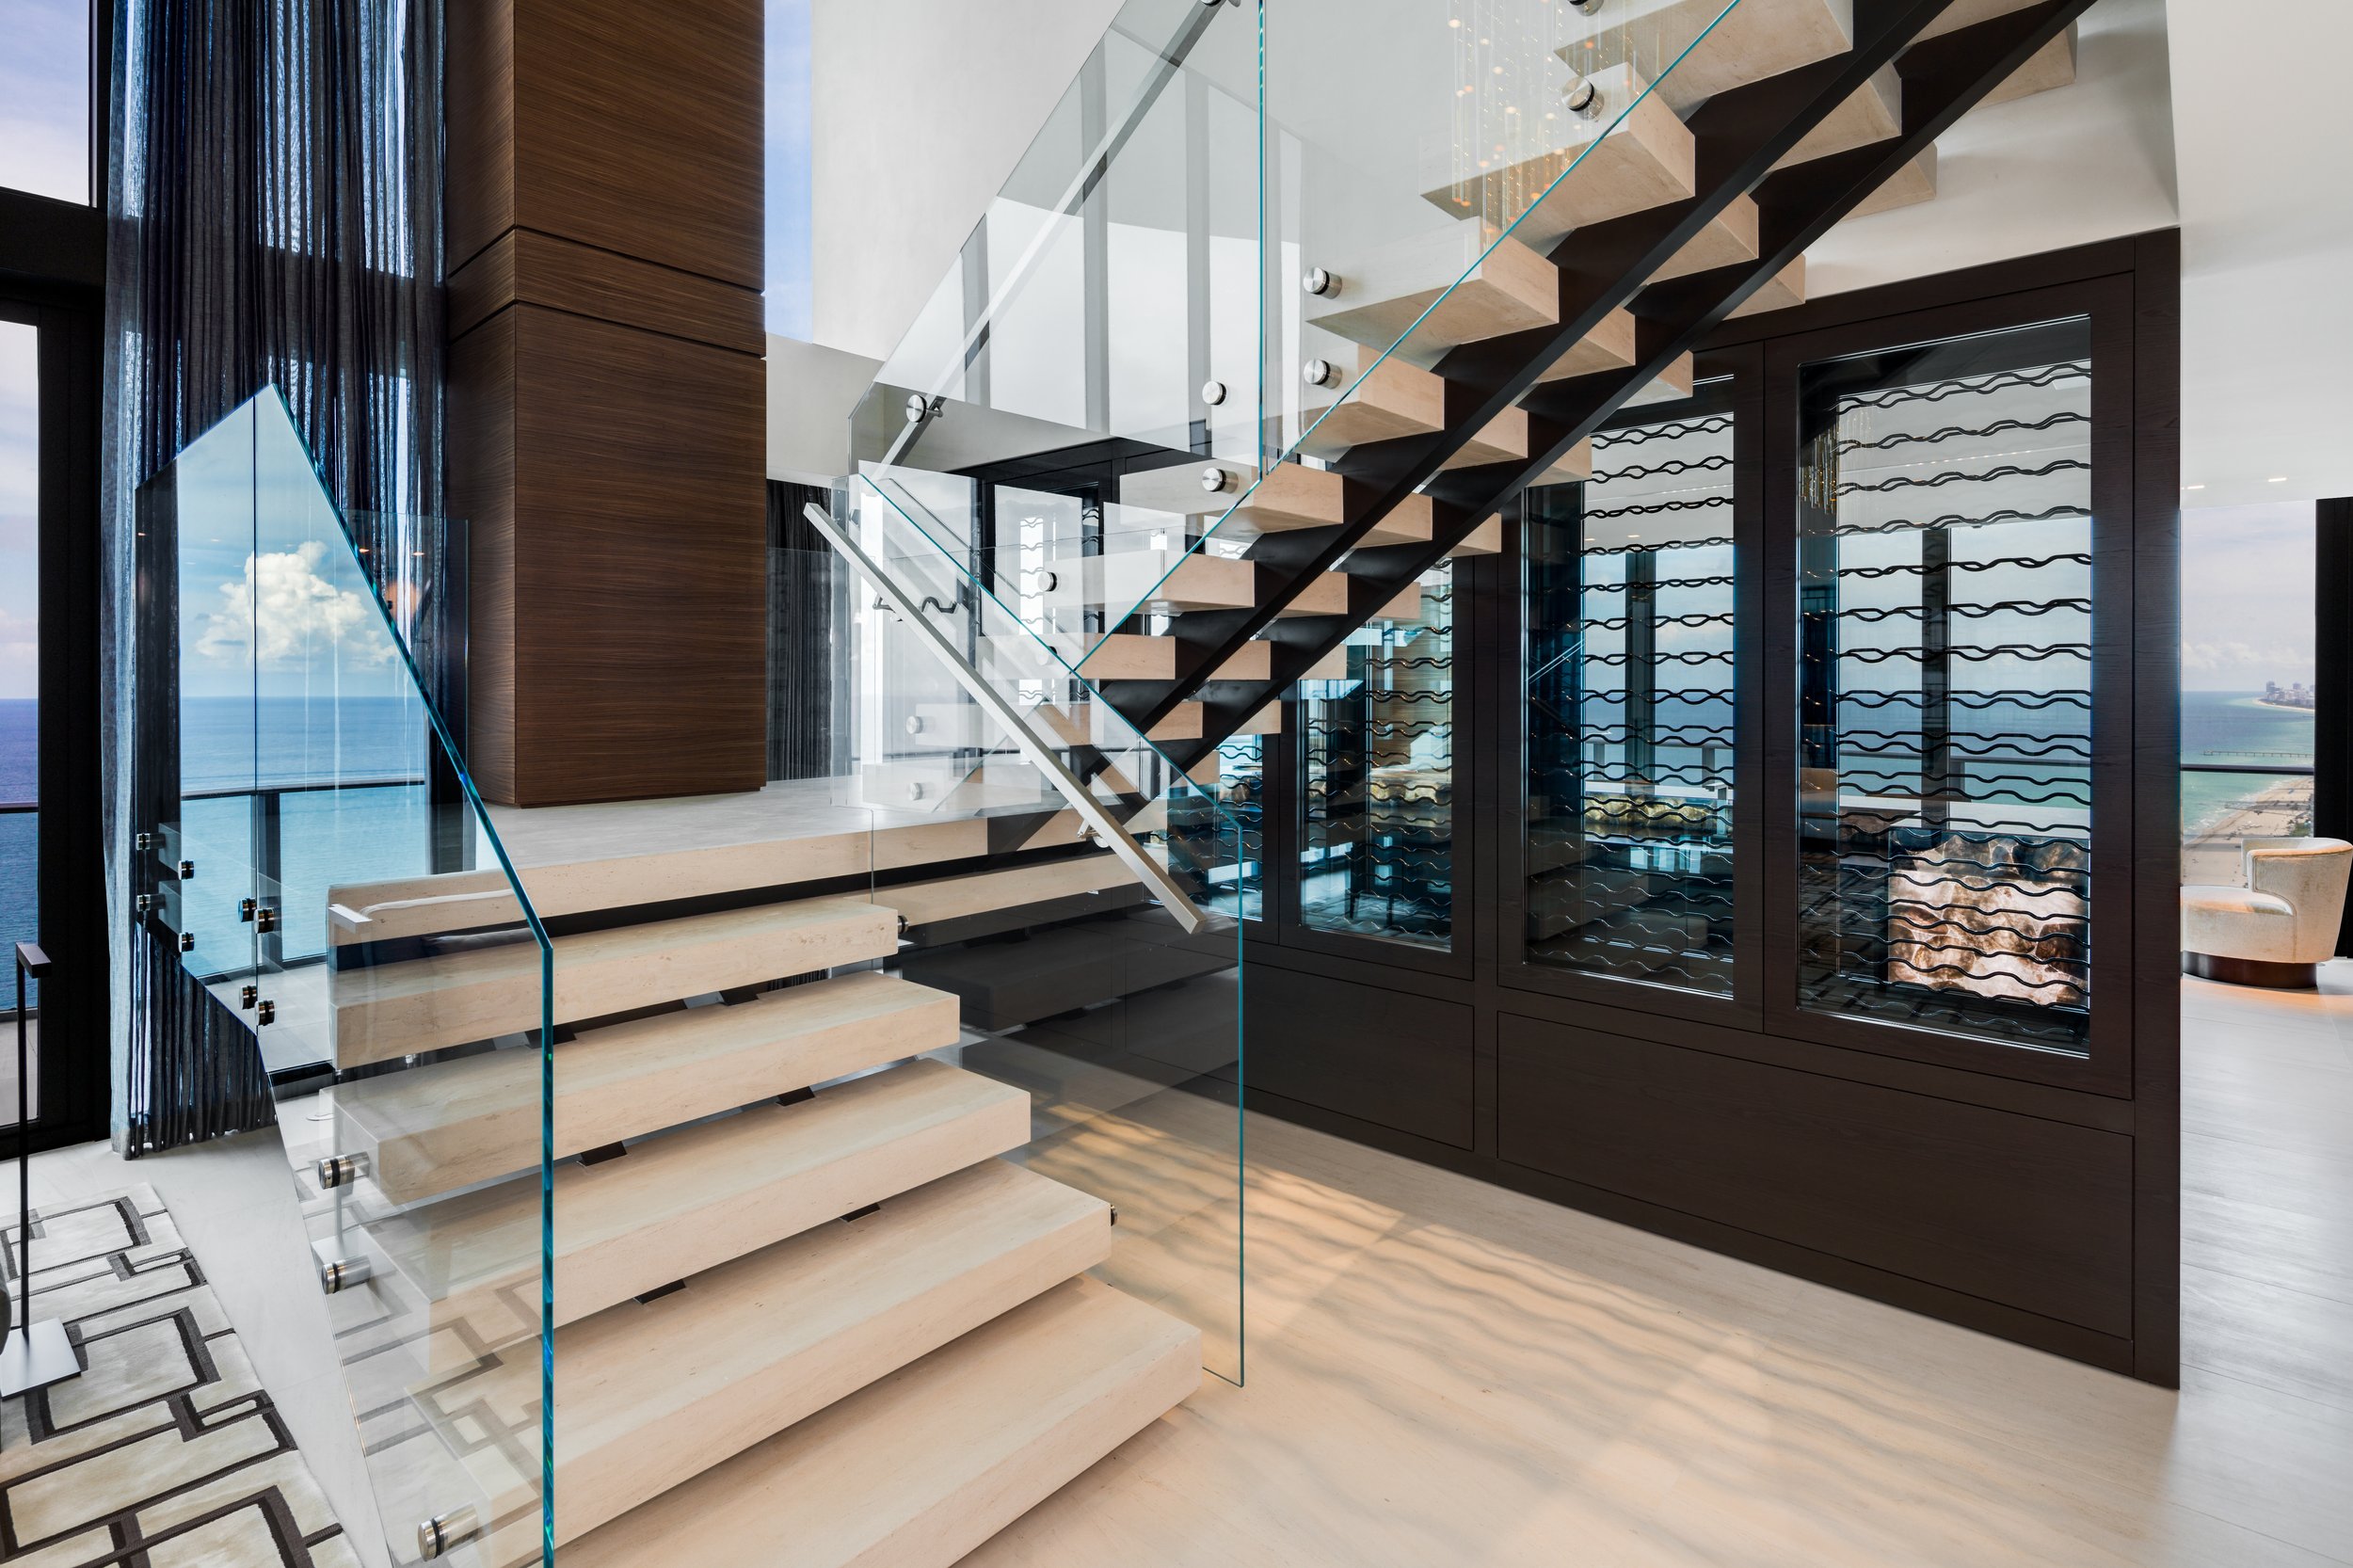 Check Out The Ultra-Luxe Penthouse At Regalia Residences In Sunny Isles Beach Which Just Hit The Market For $33.9 Million Pordes Residential41.jpg